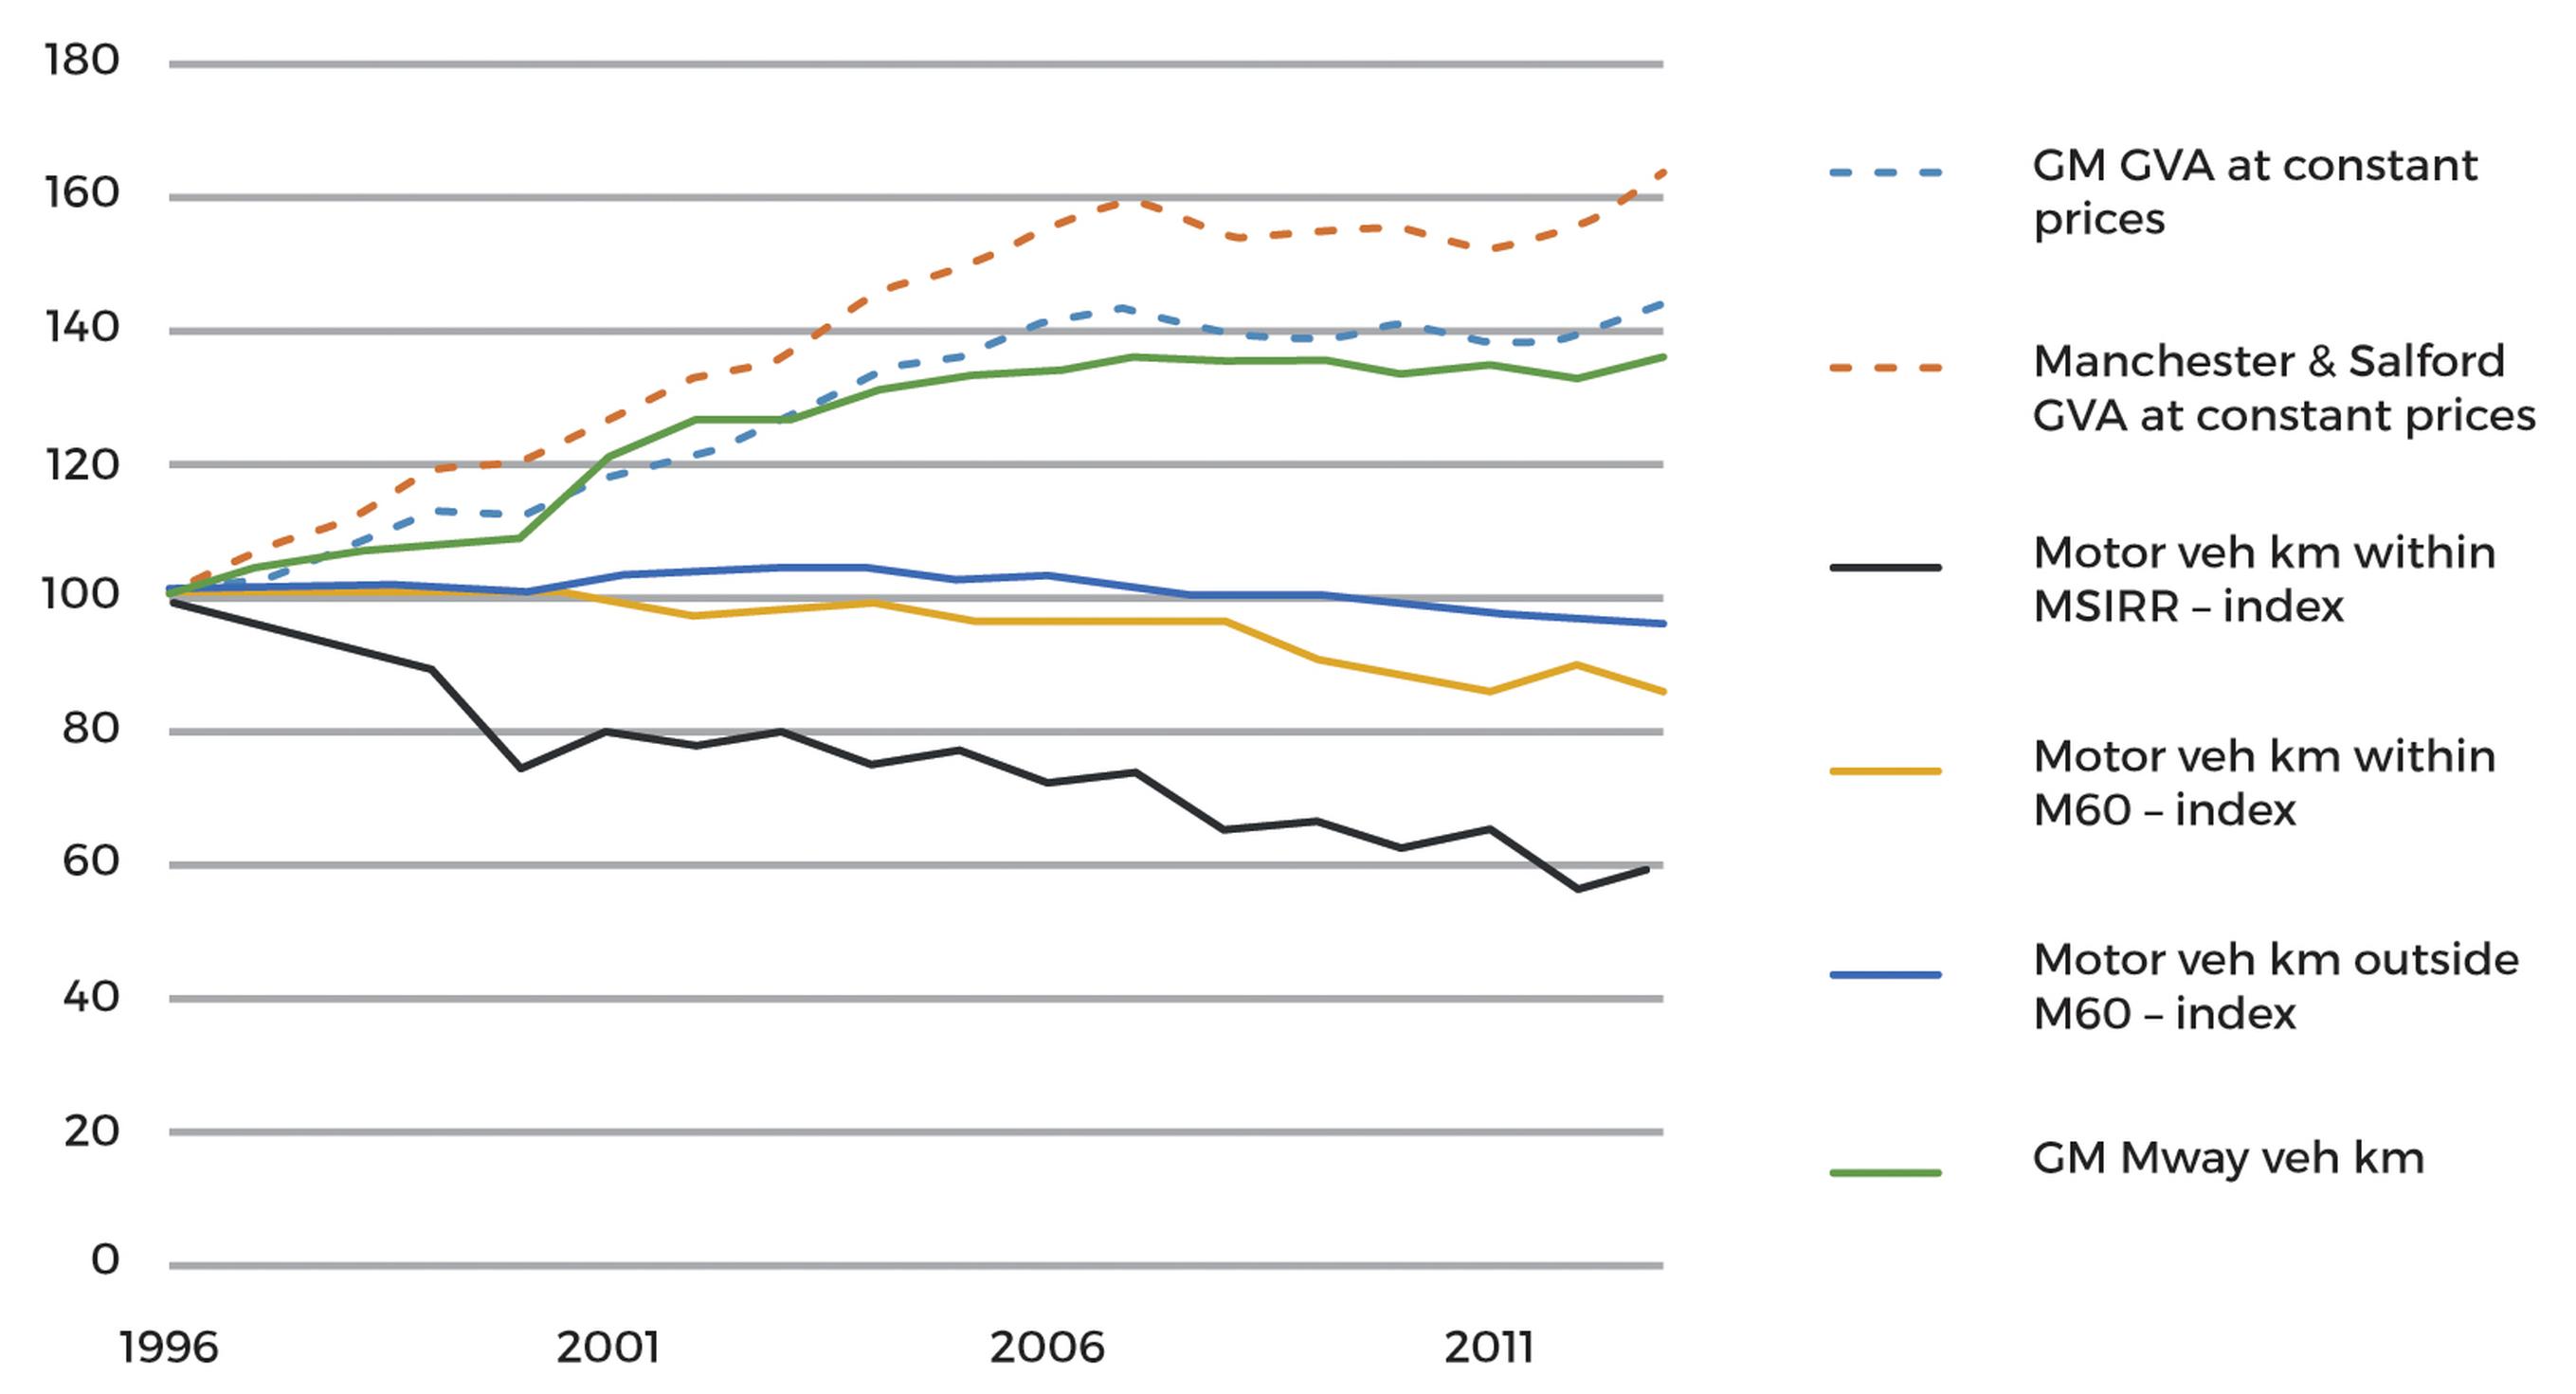 Figure 2: Changes in motor vehicle kilometres by area of Greater Manchester (1996 = 100)
Source TfGM submission to the Commission on Travel Demand